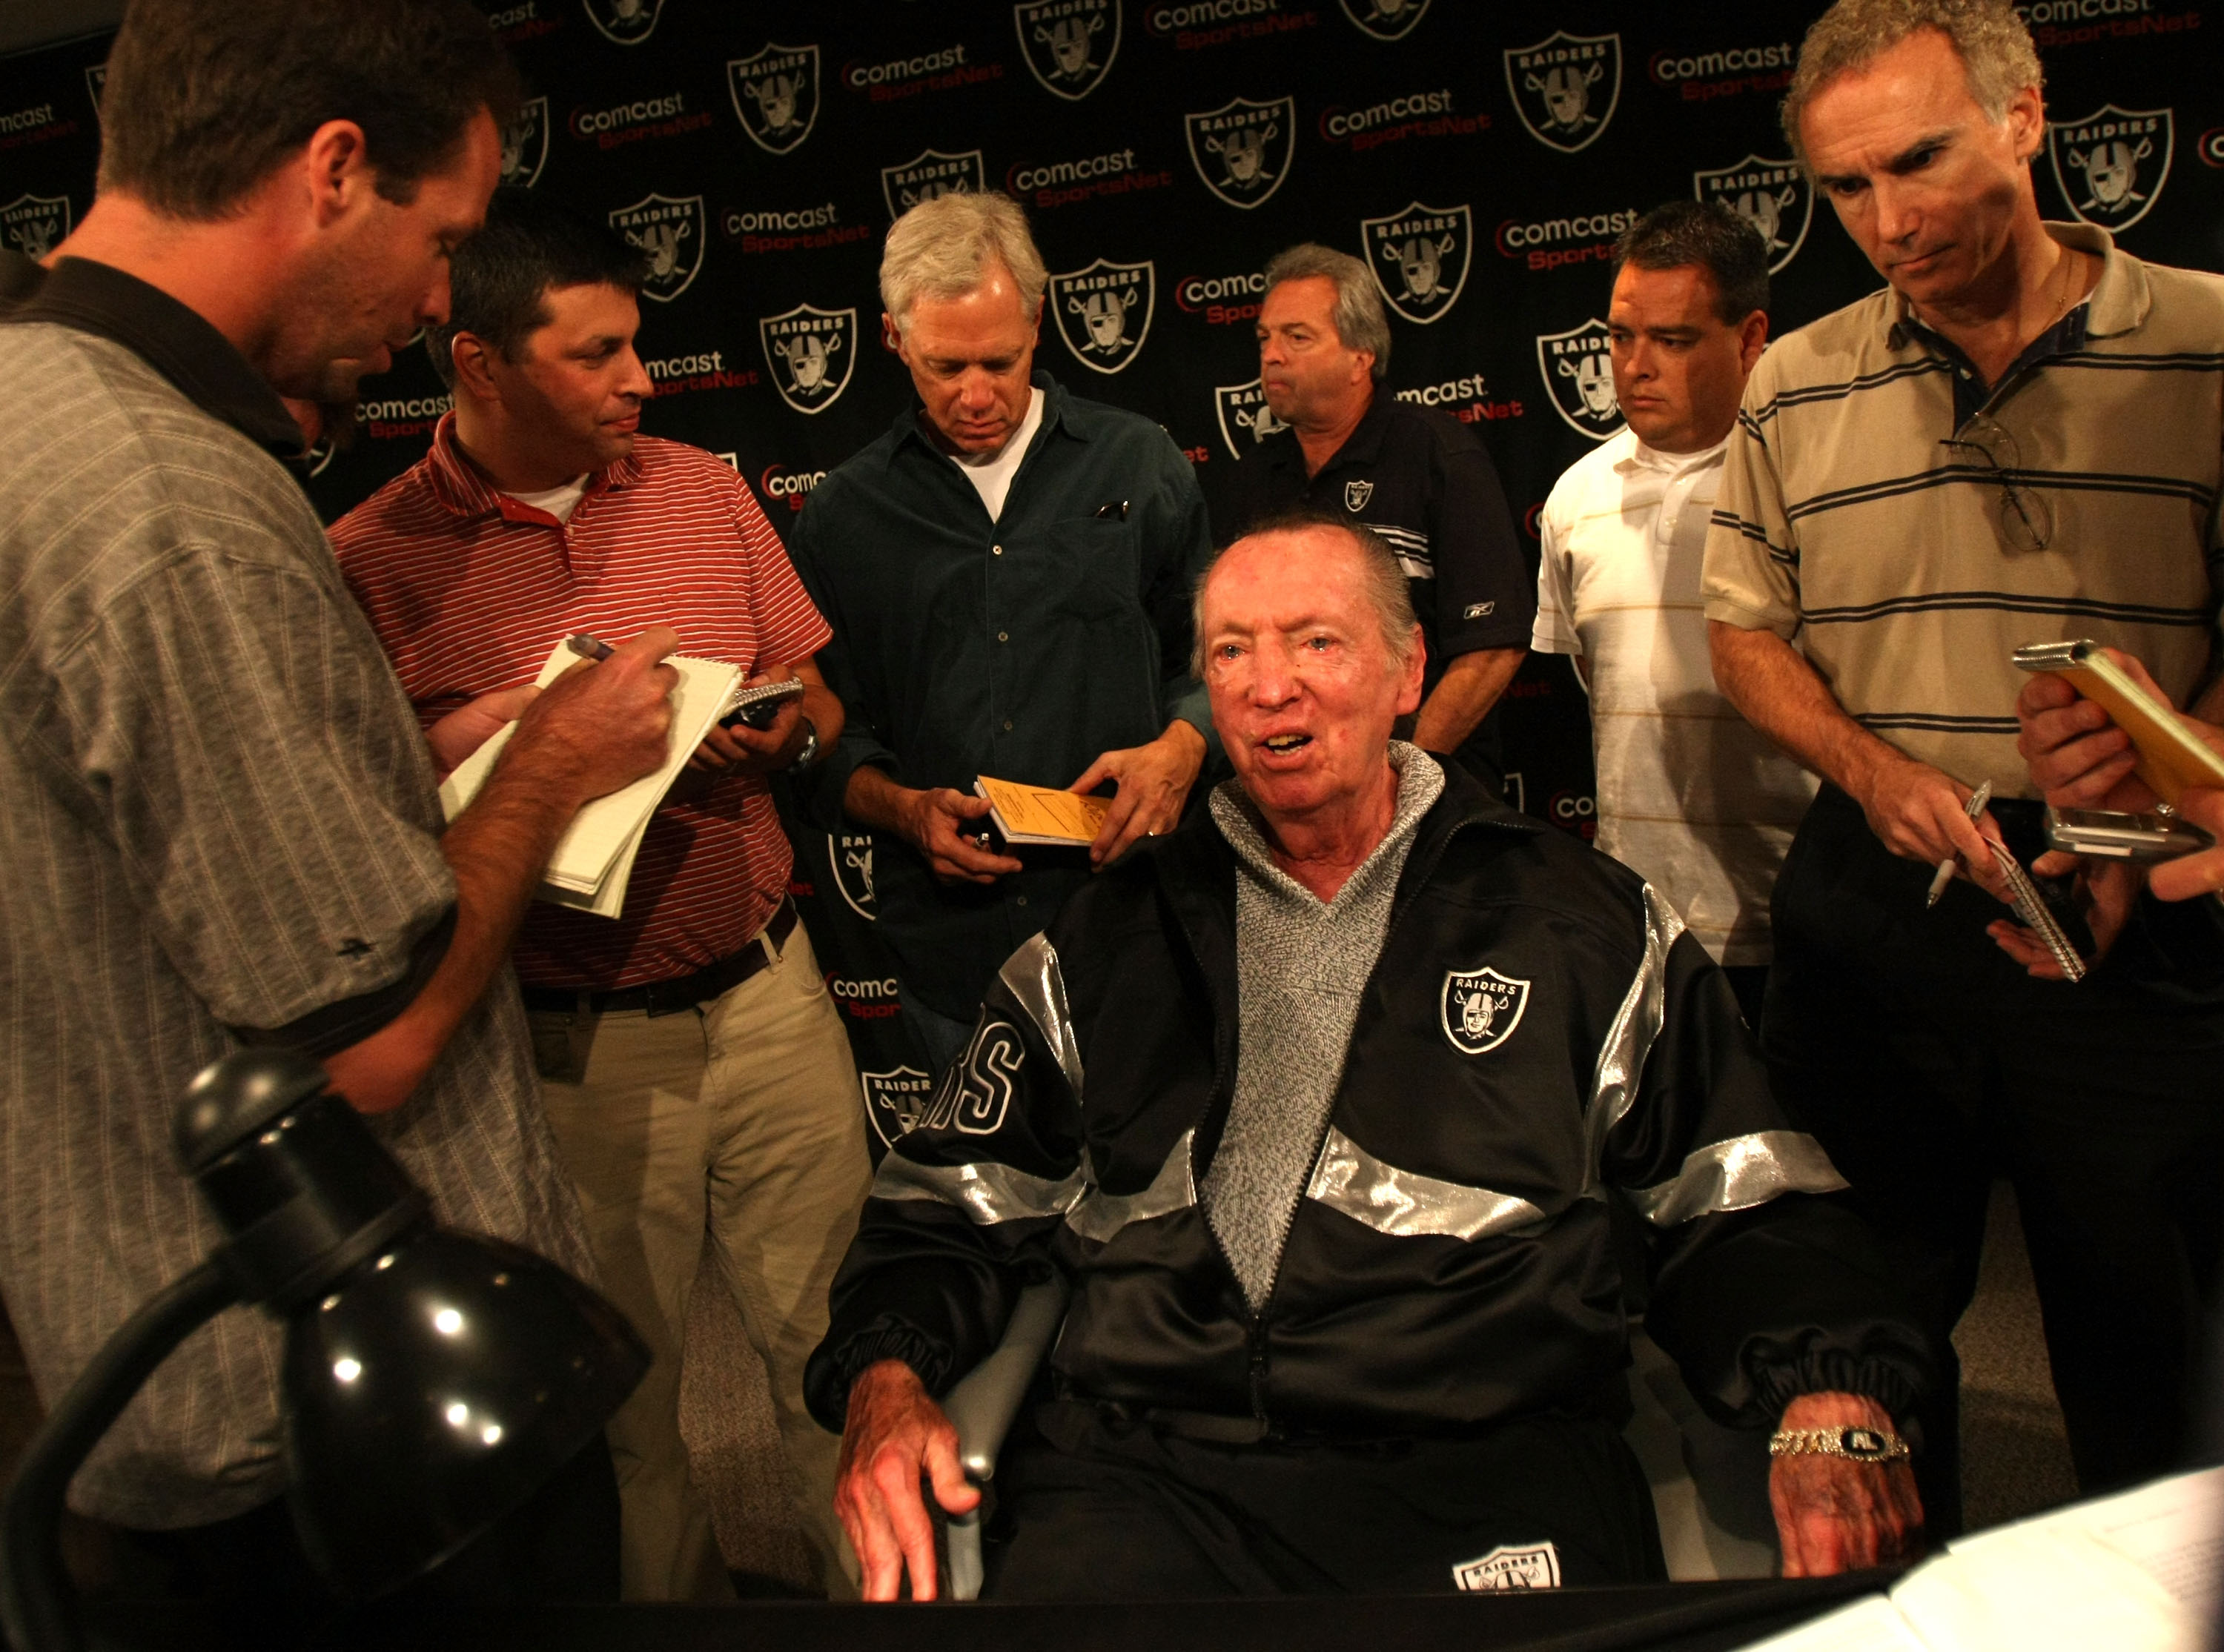 ALAMEDA, CA - SEPTEMBER 30:  Oakland Raiders owner Al Davis speaks during a press conference to announce the firing of head coach Lane Kiffin of the Oakland Raiders at thier training facility on Septemer 30, 2008 in Alameda, California.  (Photo by Jed Jac